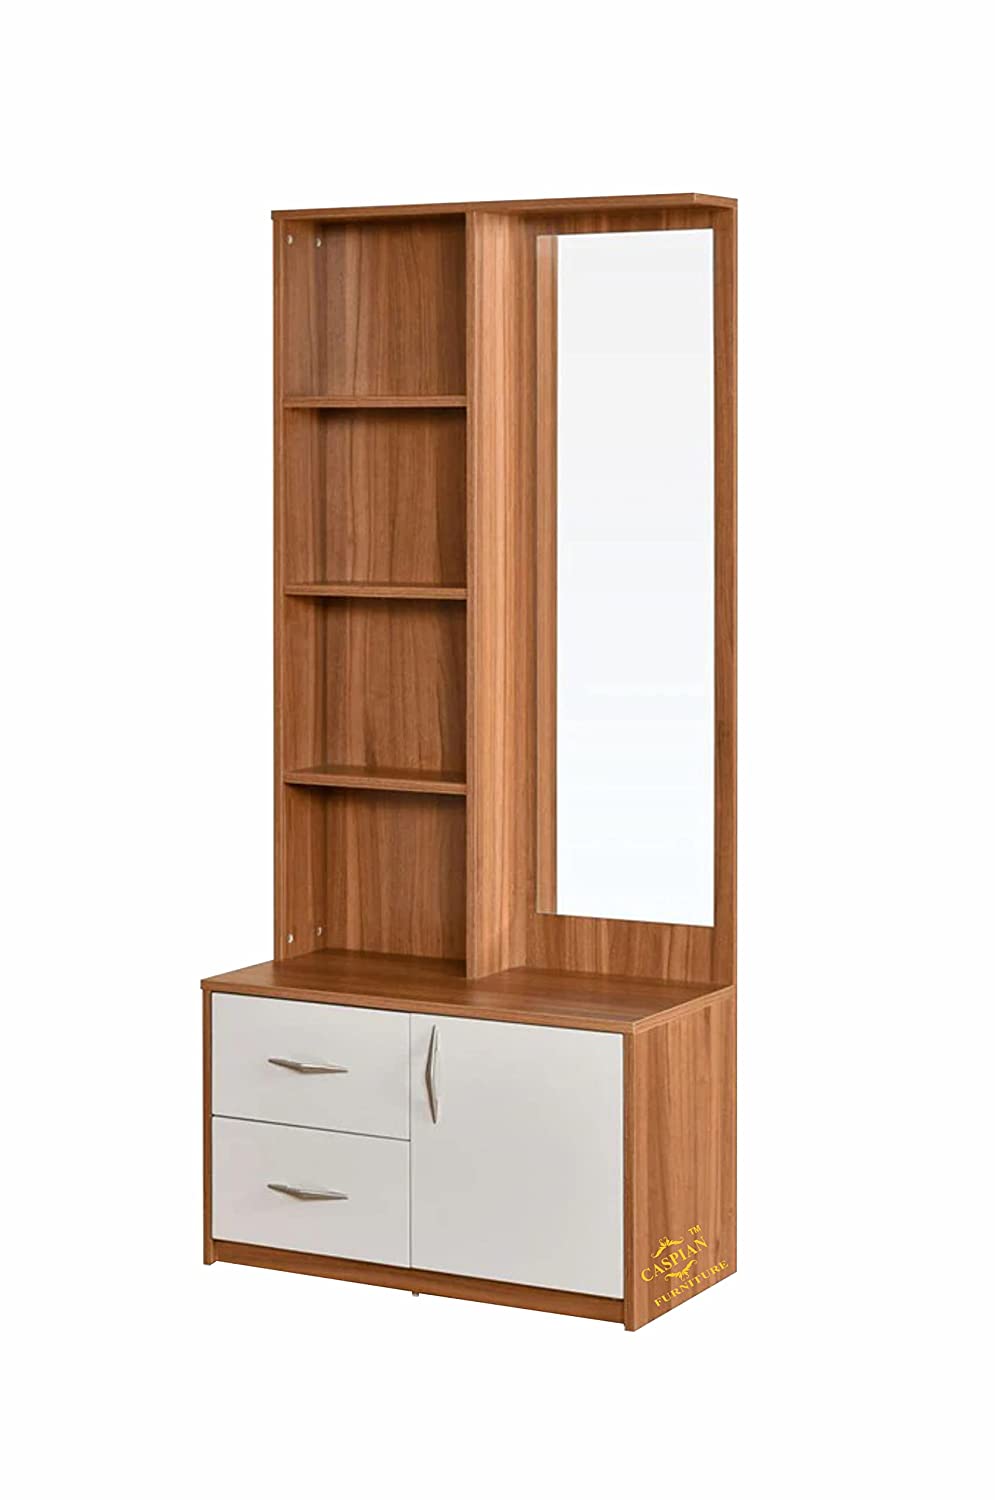 Jaya Solid Wood Dressing Table Price in India - Buy Jaya Solid Wood  Dressing Table online at Flipkart.com